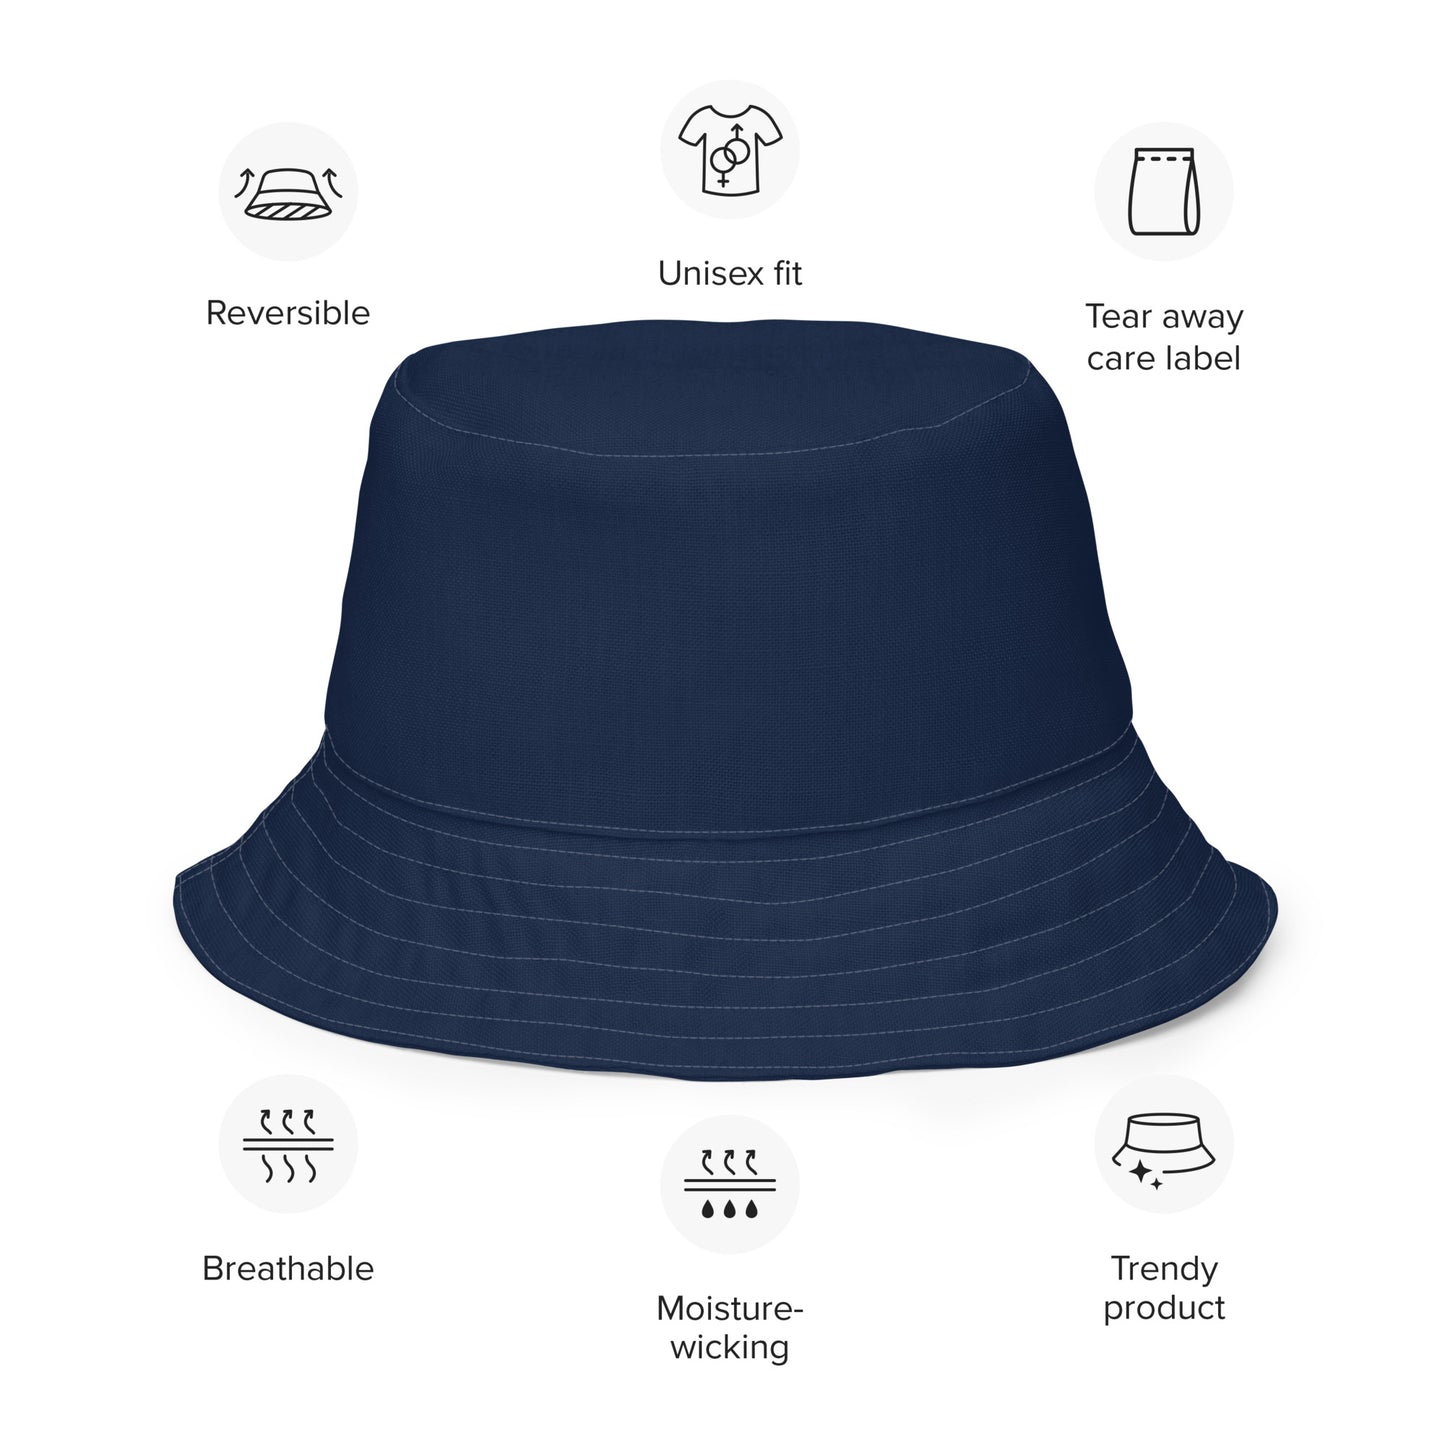 Navy and Teal Reversible Bucket Sun Hat